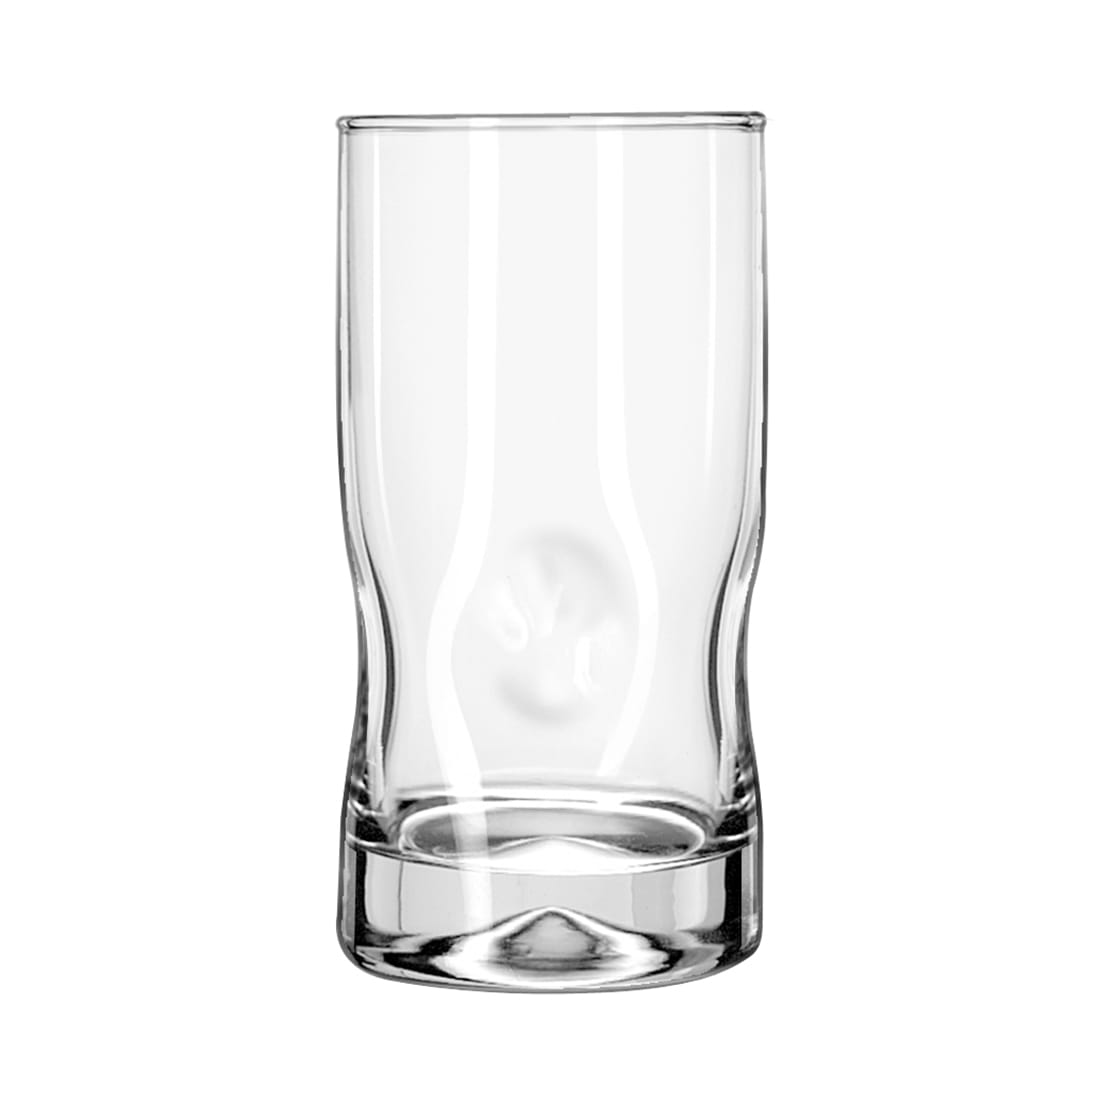 True crime Libbey Can Glass Full Wrap Beer glass (1920451)